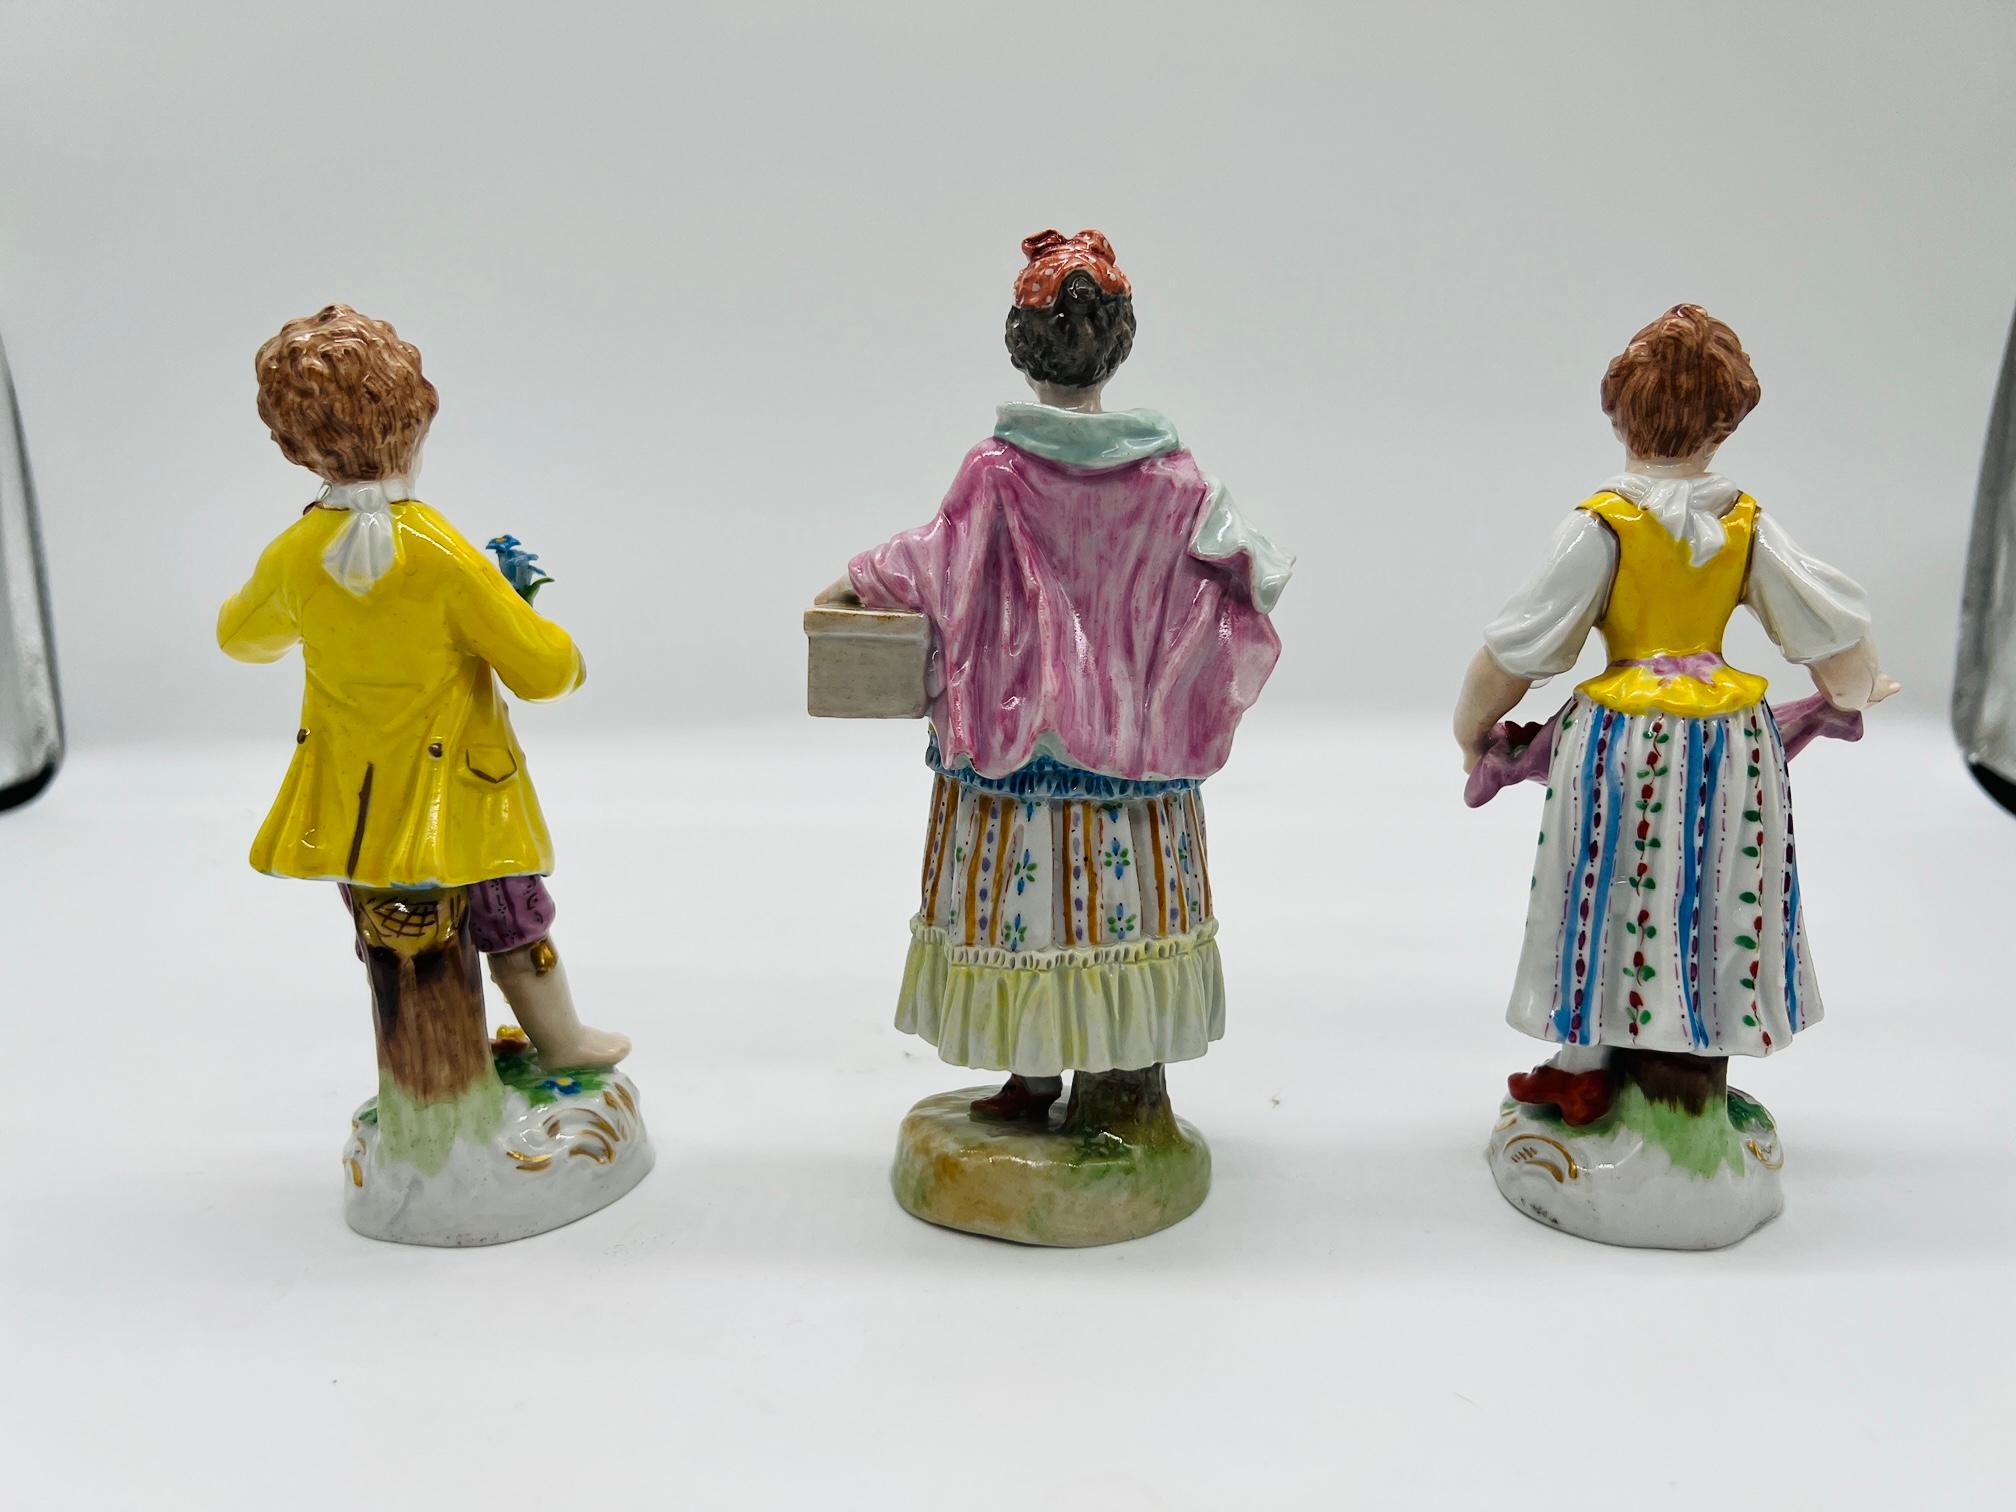 Dresden Porcelain (German, 1872-2020), circa post 1902.

A grouping of 3 antique porcelain figures including:
1) Young Boy Picking Flowers
2) Young Girl Collecting Flowers 
3) Lady With Basket

Sold as a collection